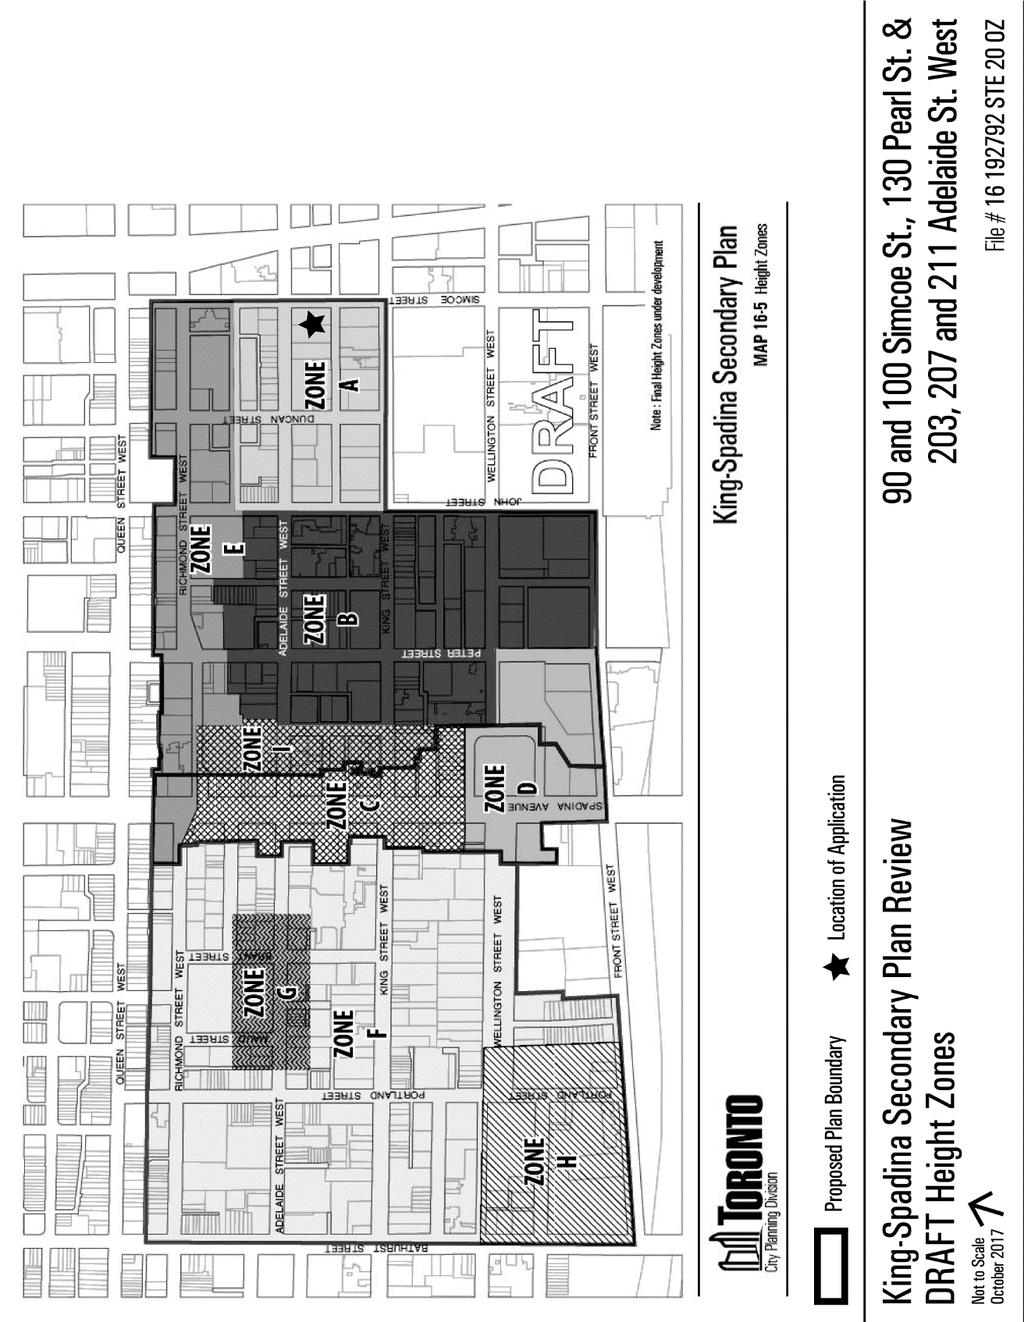 Attachment 6: King-Spadina Secondary Plan Review Draft Height Zones 90 and